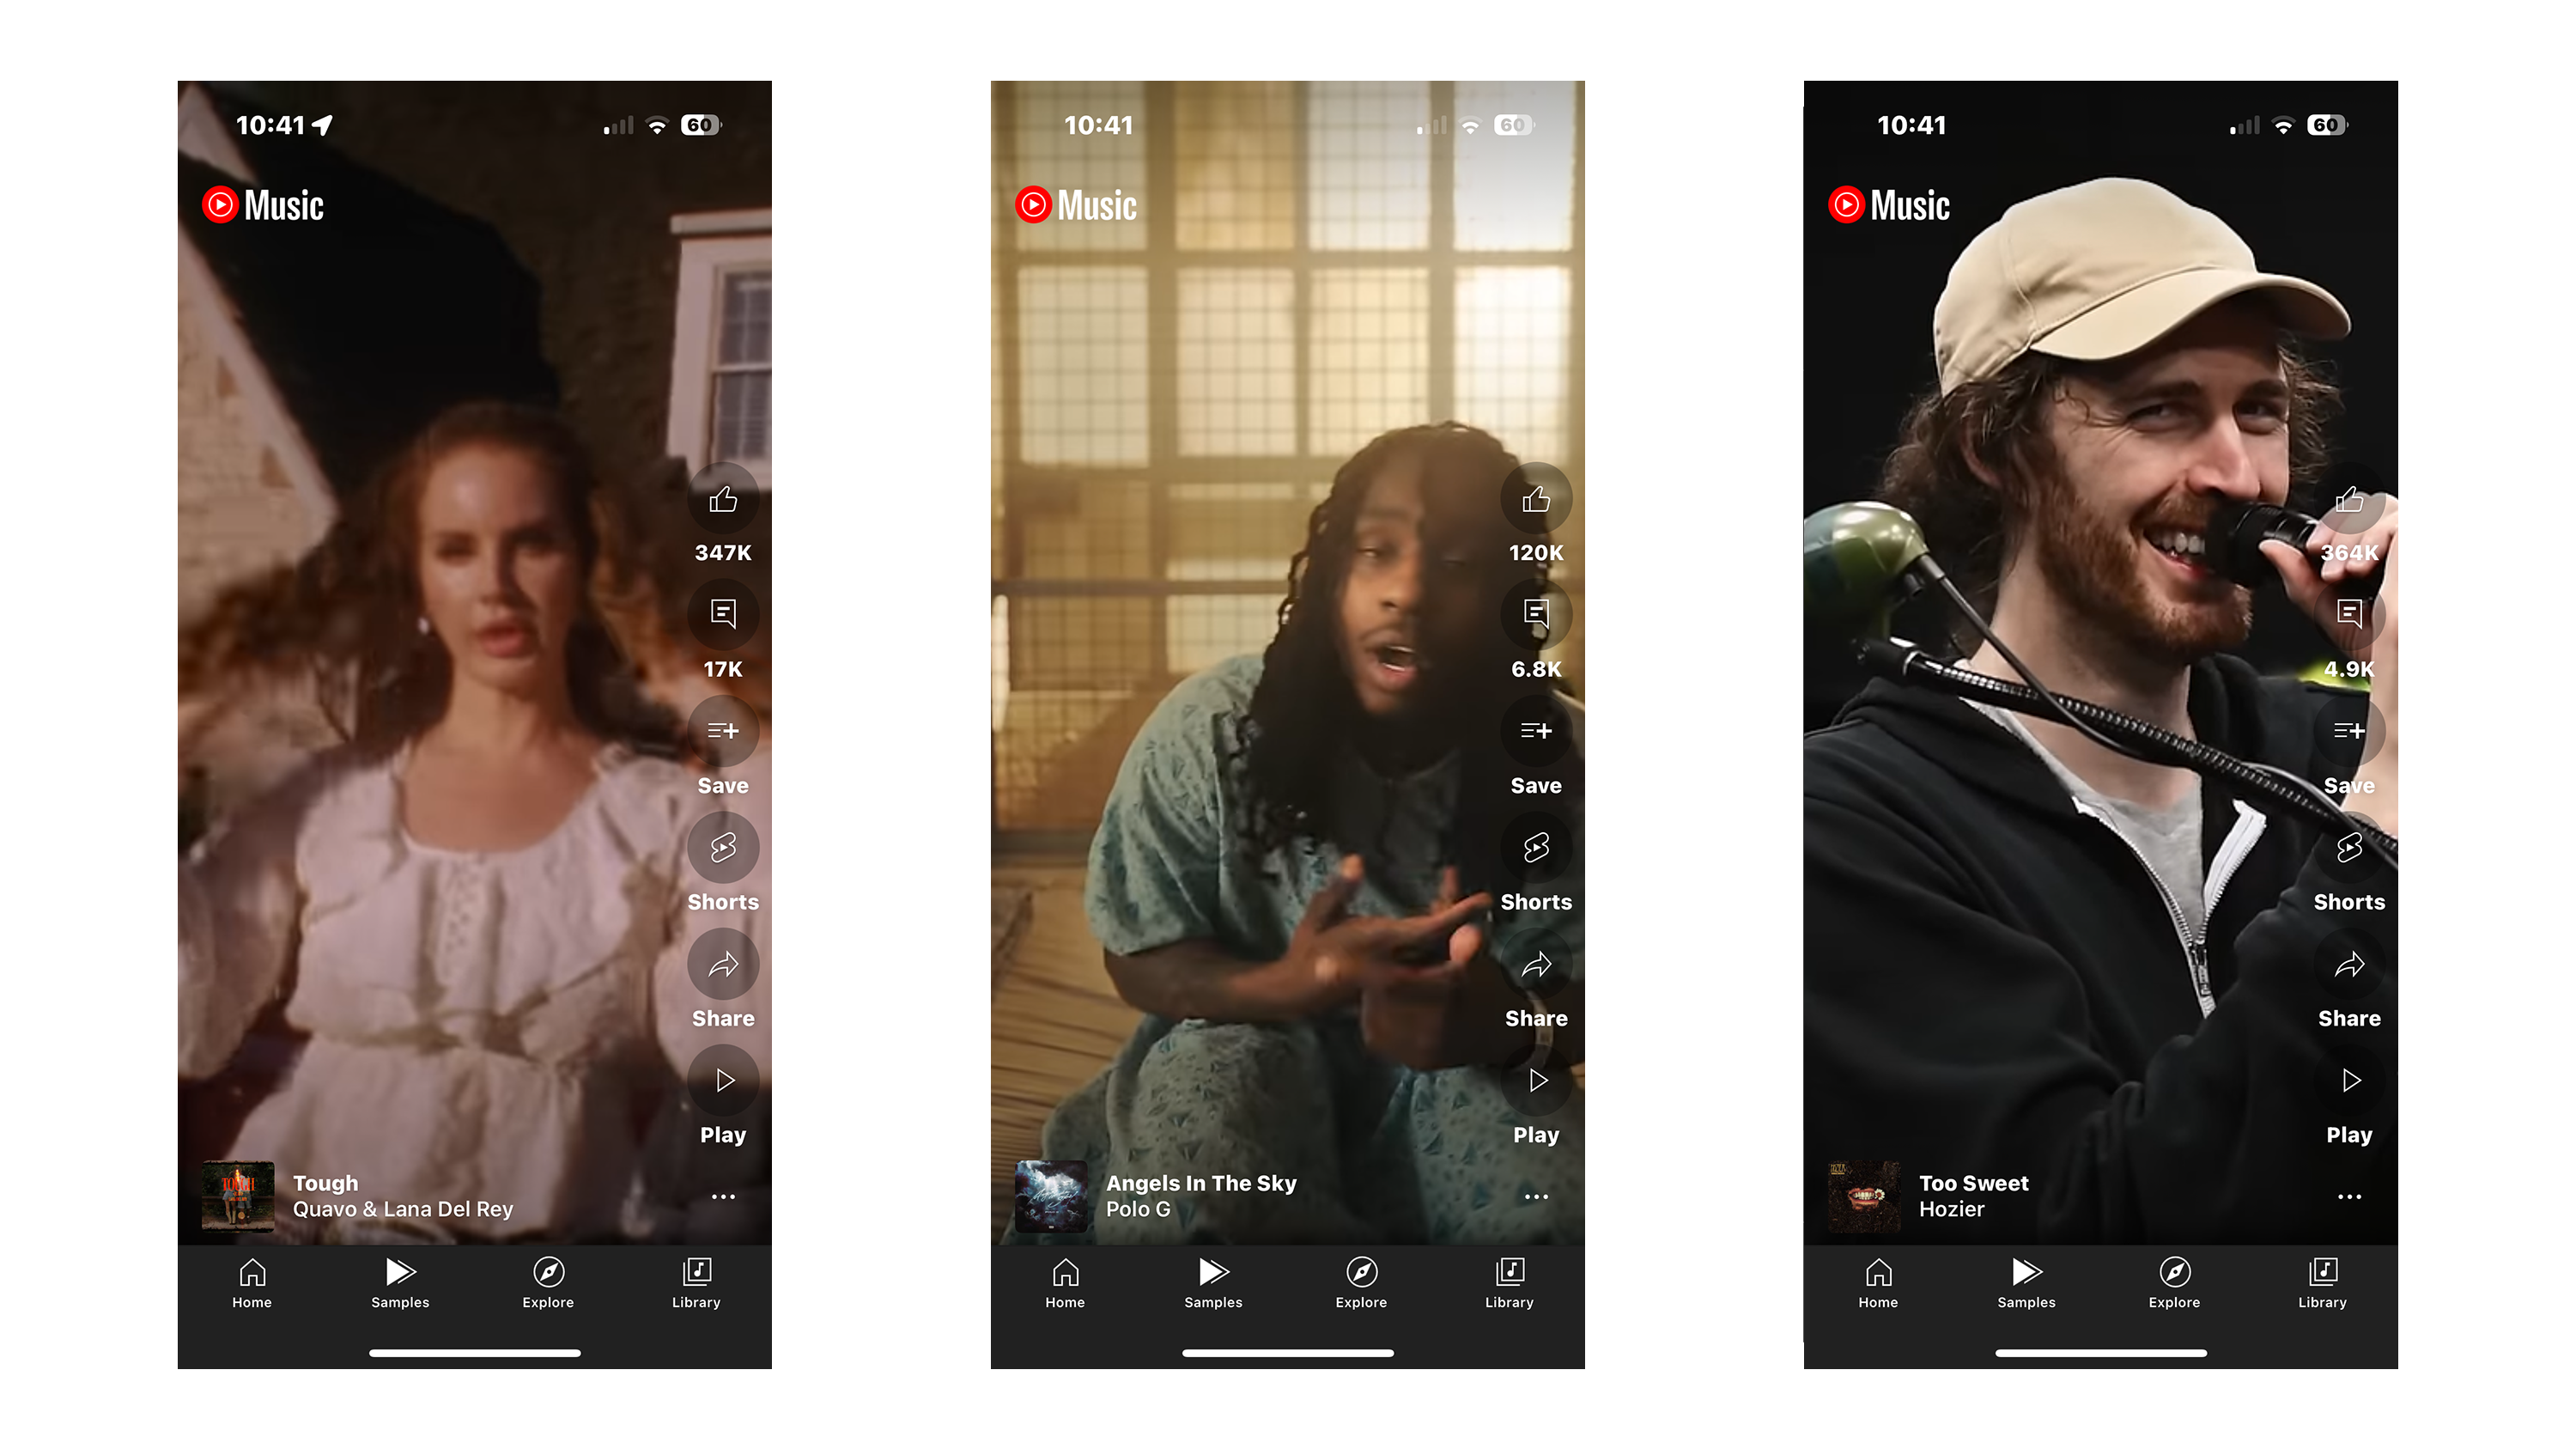 The Sessions tab in youtube music shows music videos and content that's been recorded live.